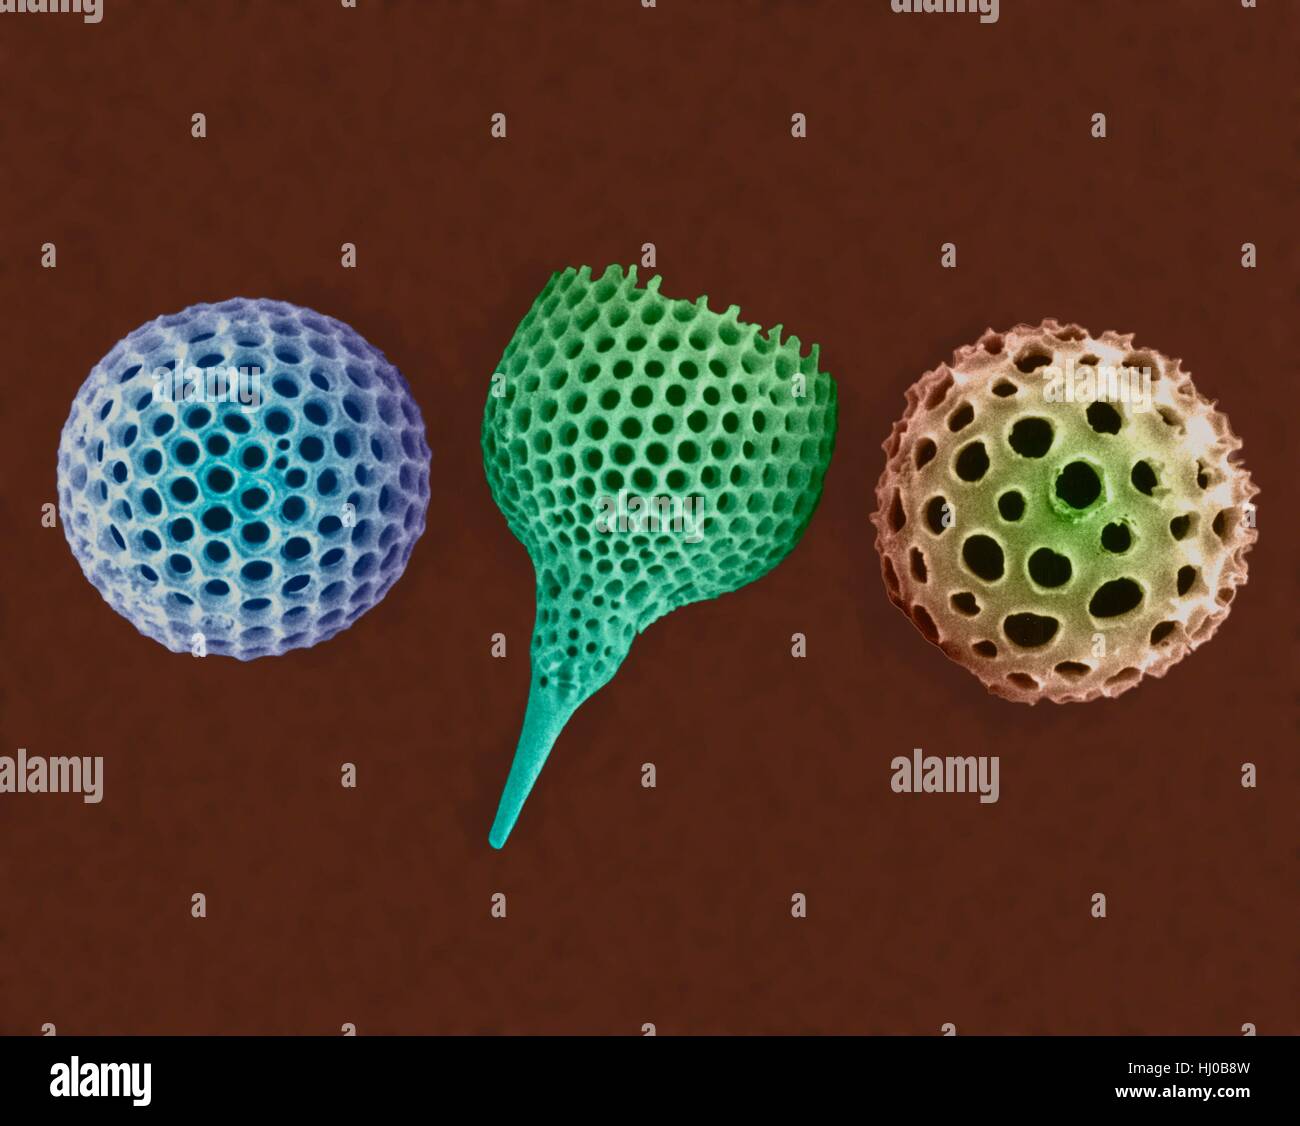 Radiolarian tests (salt water),coloured scanning electron micrograph (SEM).The hard skeletons are composed of silica or strontium sulphate.The Radiolaria (also called Radiozoa) are protozoa that produce intricate mineral skeletons.They are found as zooplankton throughout ocean their skeletal Stock Photo